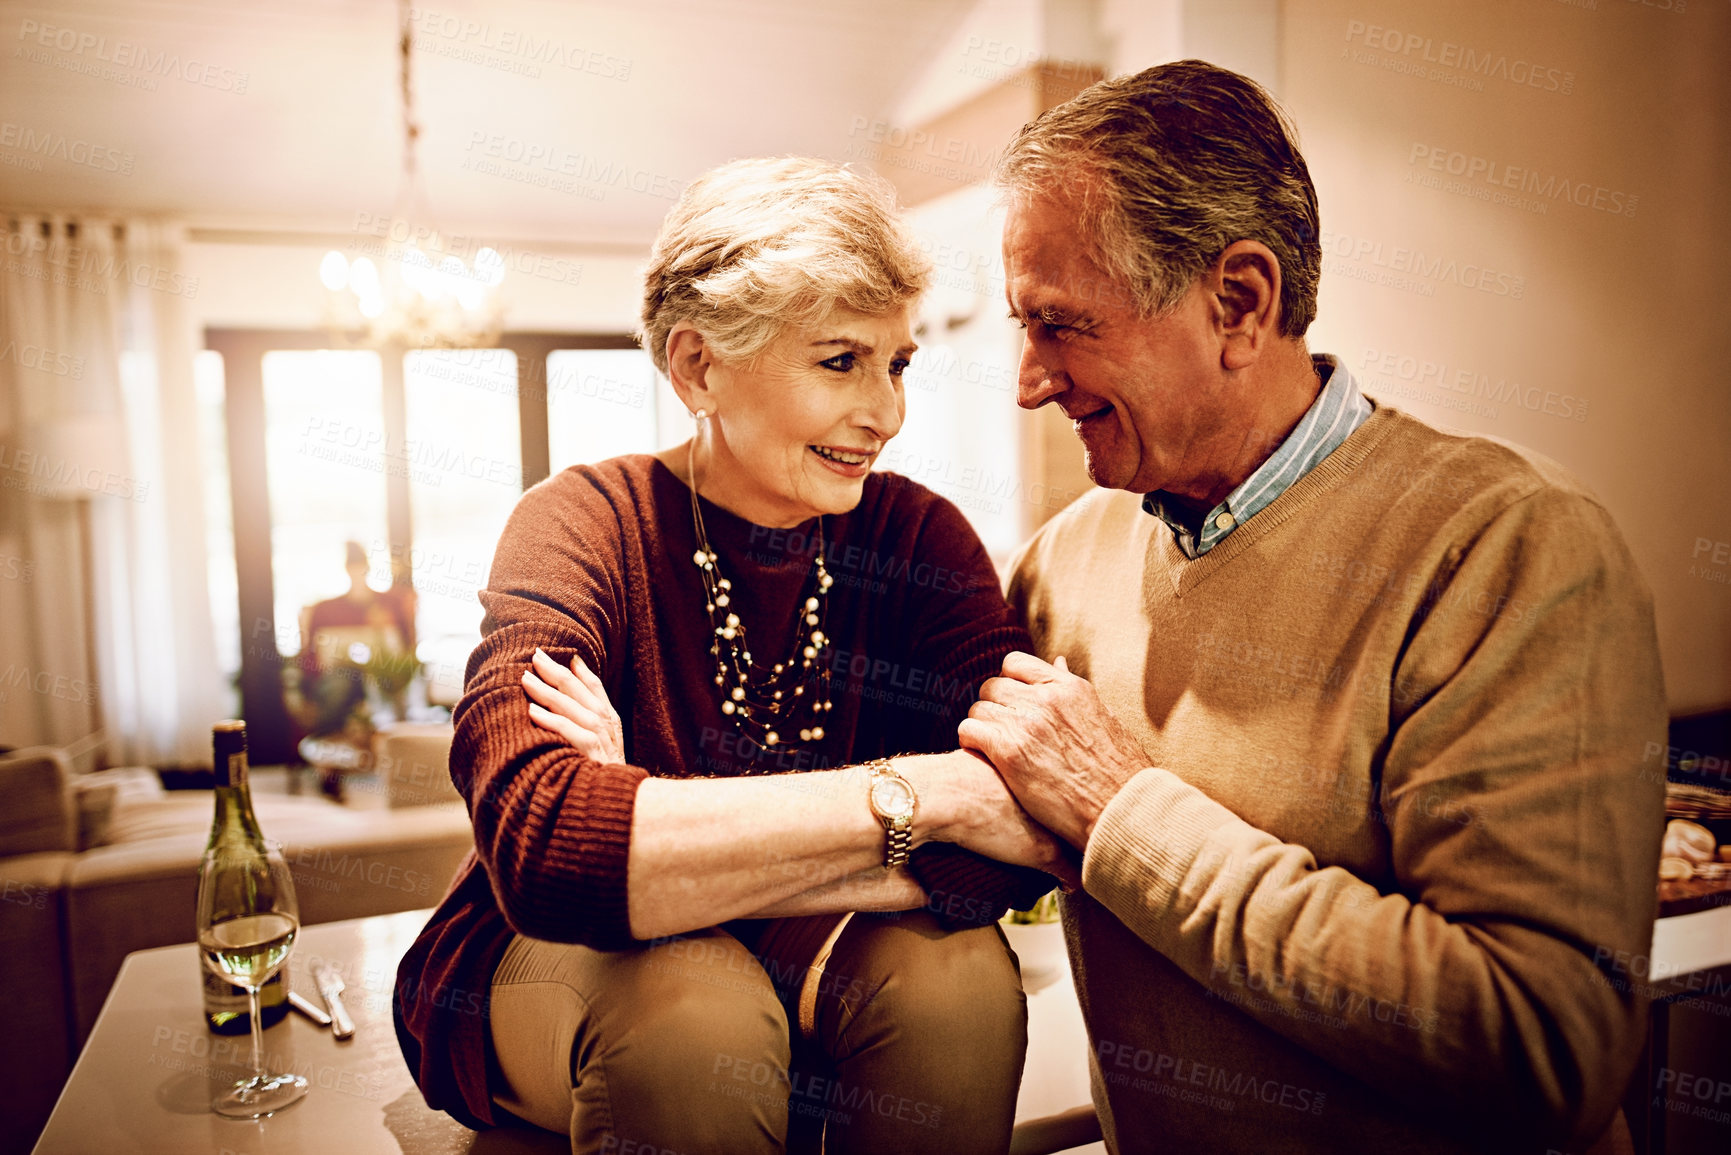 Buy stock photo Shot of an elderly couple chatting and drinking wine together in their kitchen